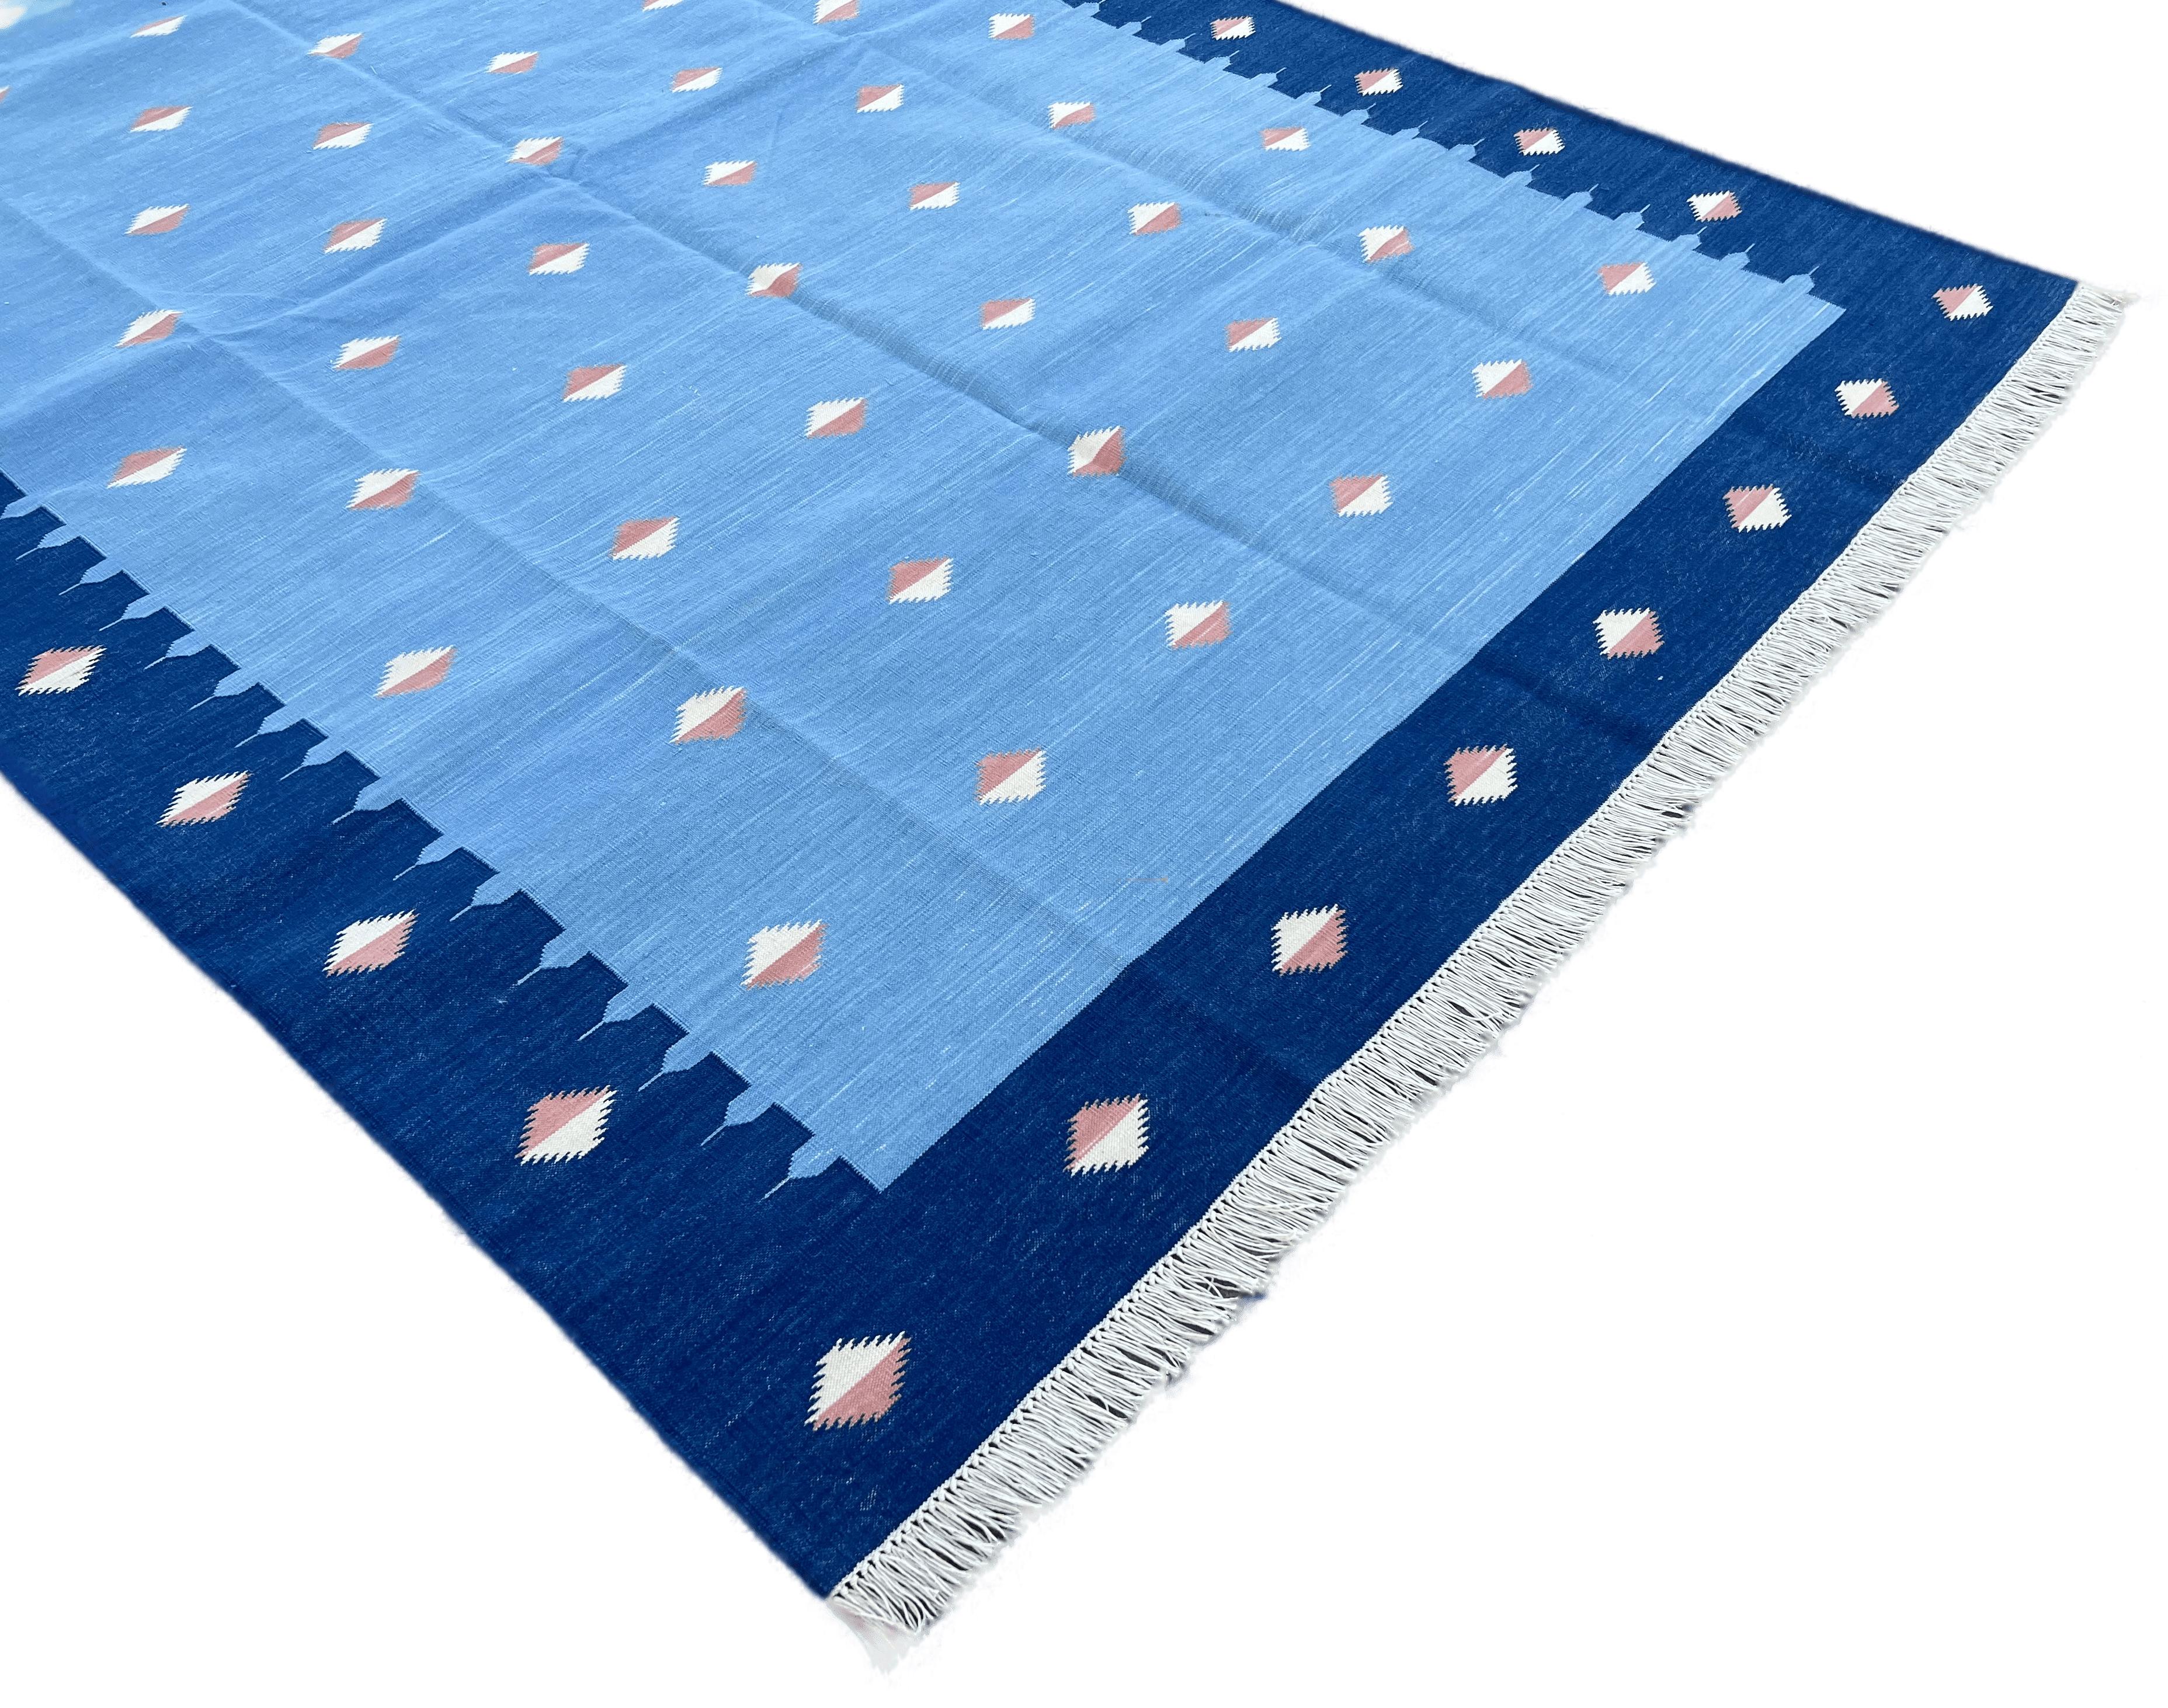 Handmade Cotton Area Flat Weave Rug, 5x8 Blue And Orange Diamond Indian Dhurrie In New Condition For Sale In Jaipur, IN